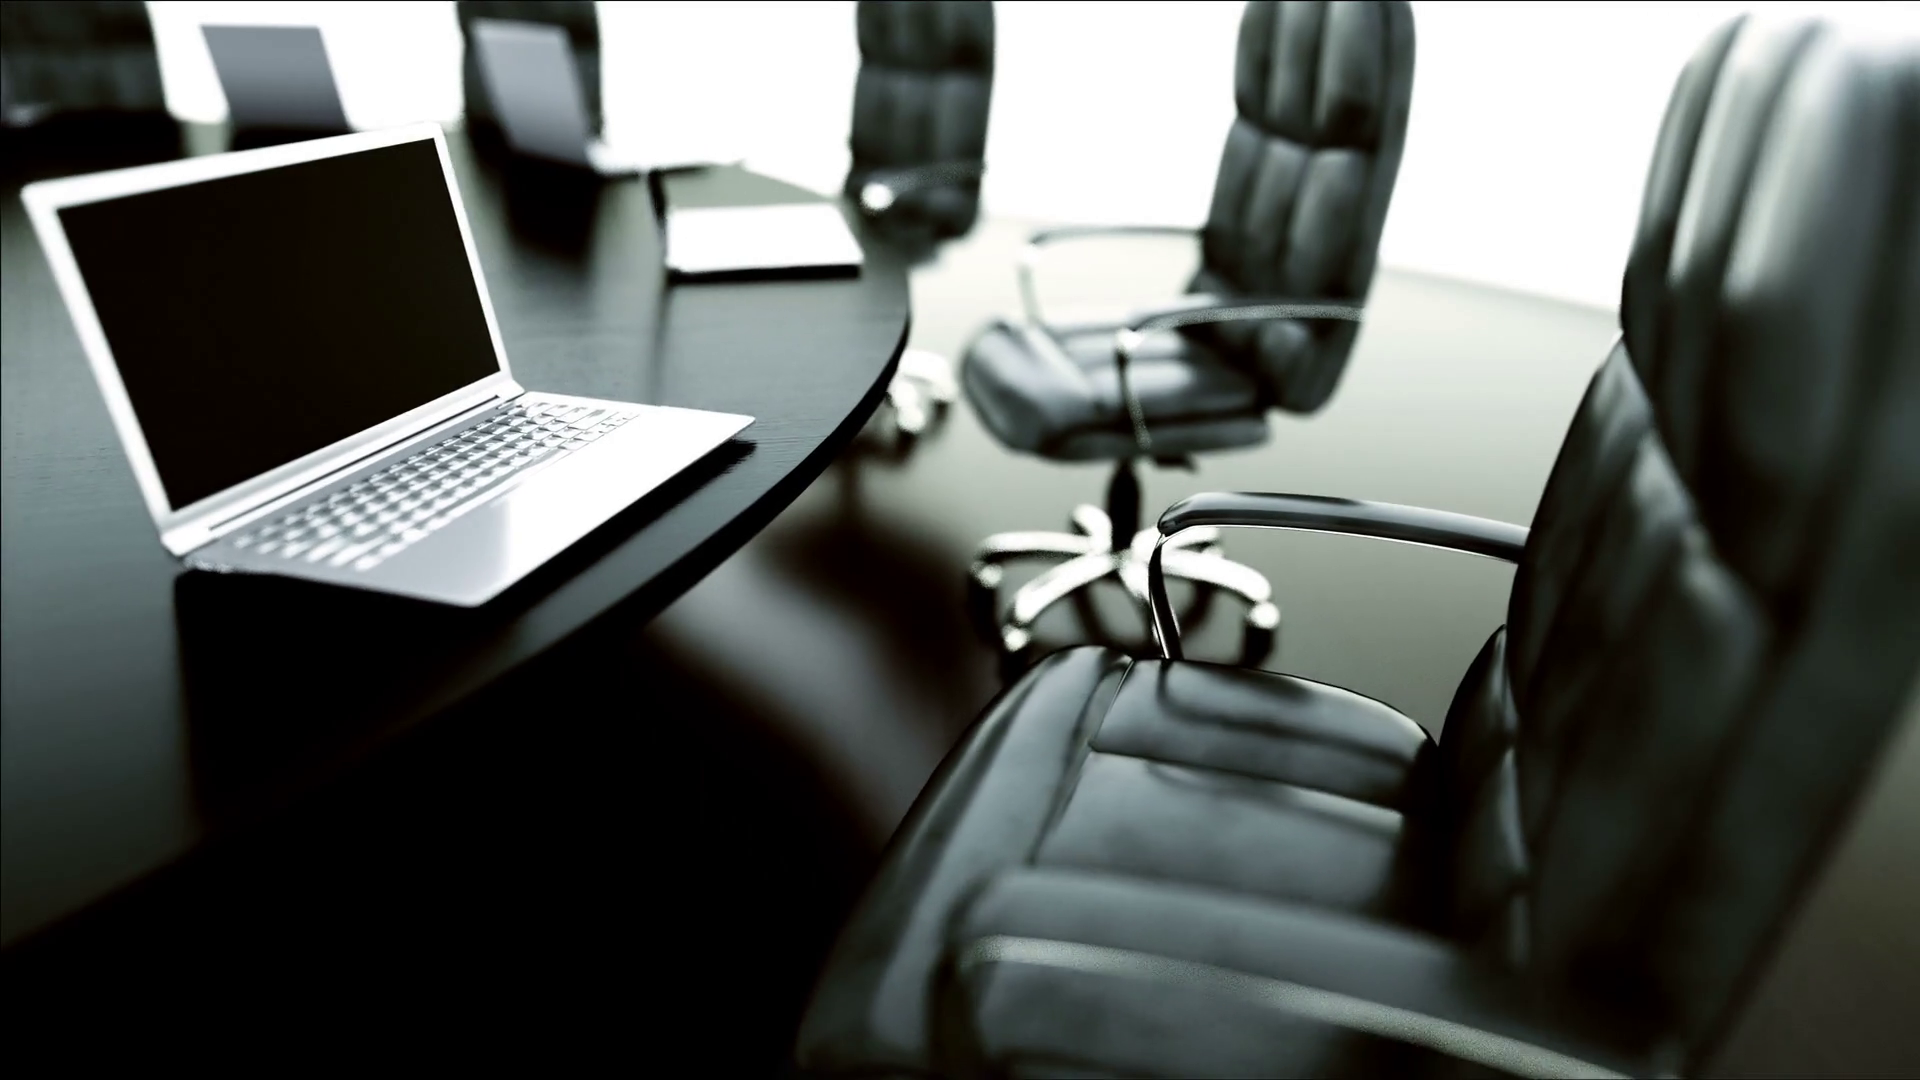 boardroom-meeting-room-and-conference-table-with-notebooks-business-concept_h4jm3r5kl_thumbnail-full01.png